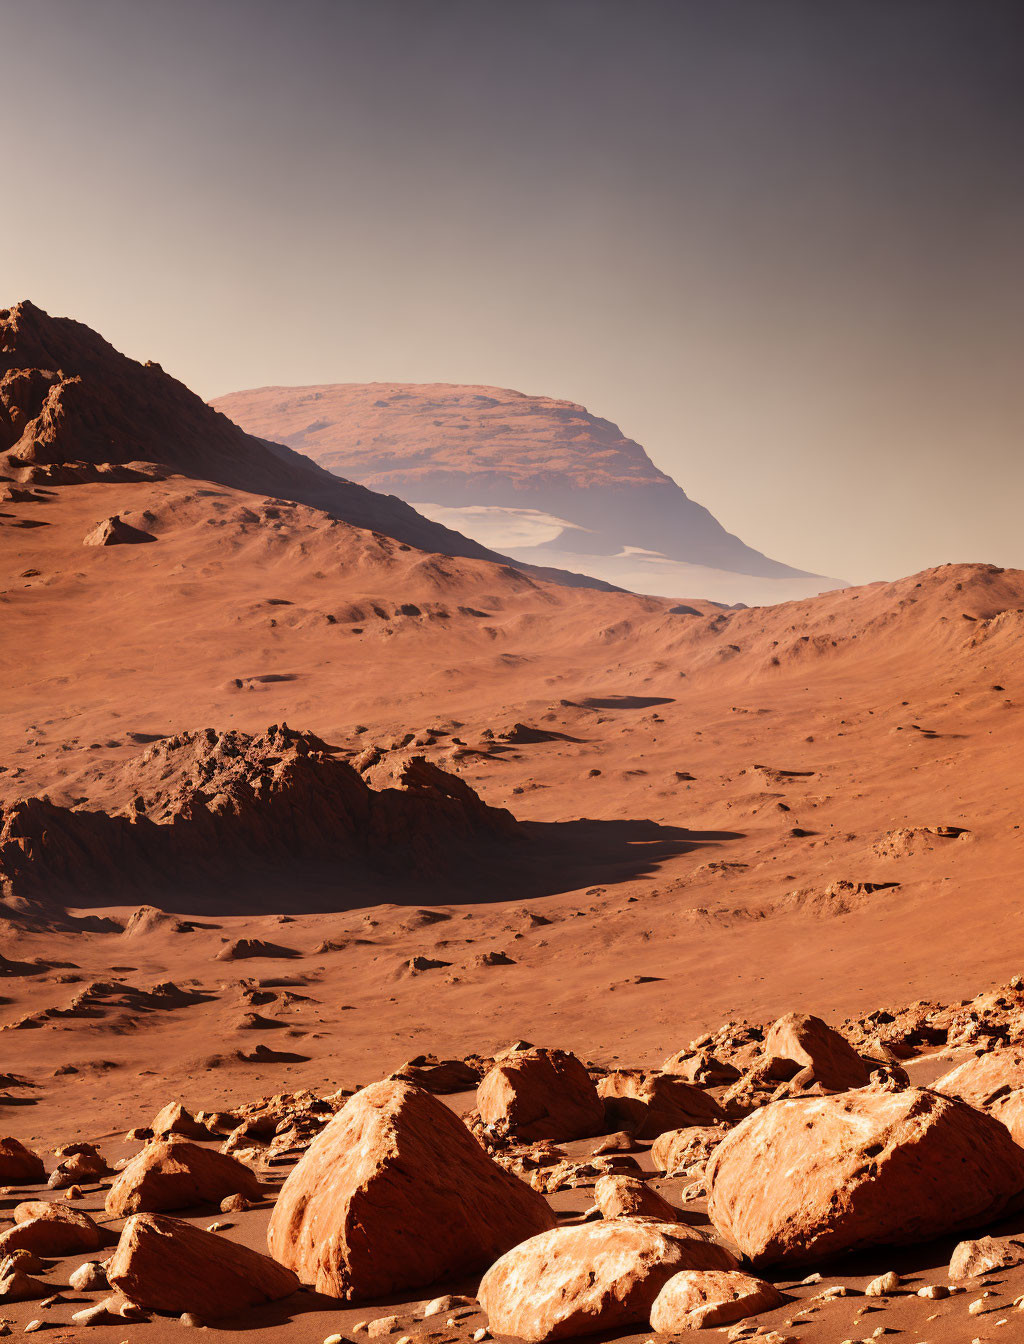 Rocky Martian Terrain with Layered Mountains and Reddish Soil